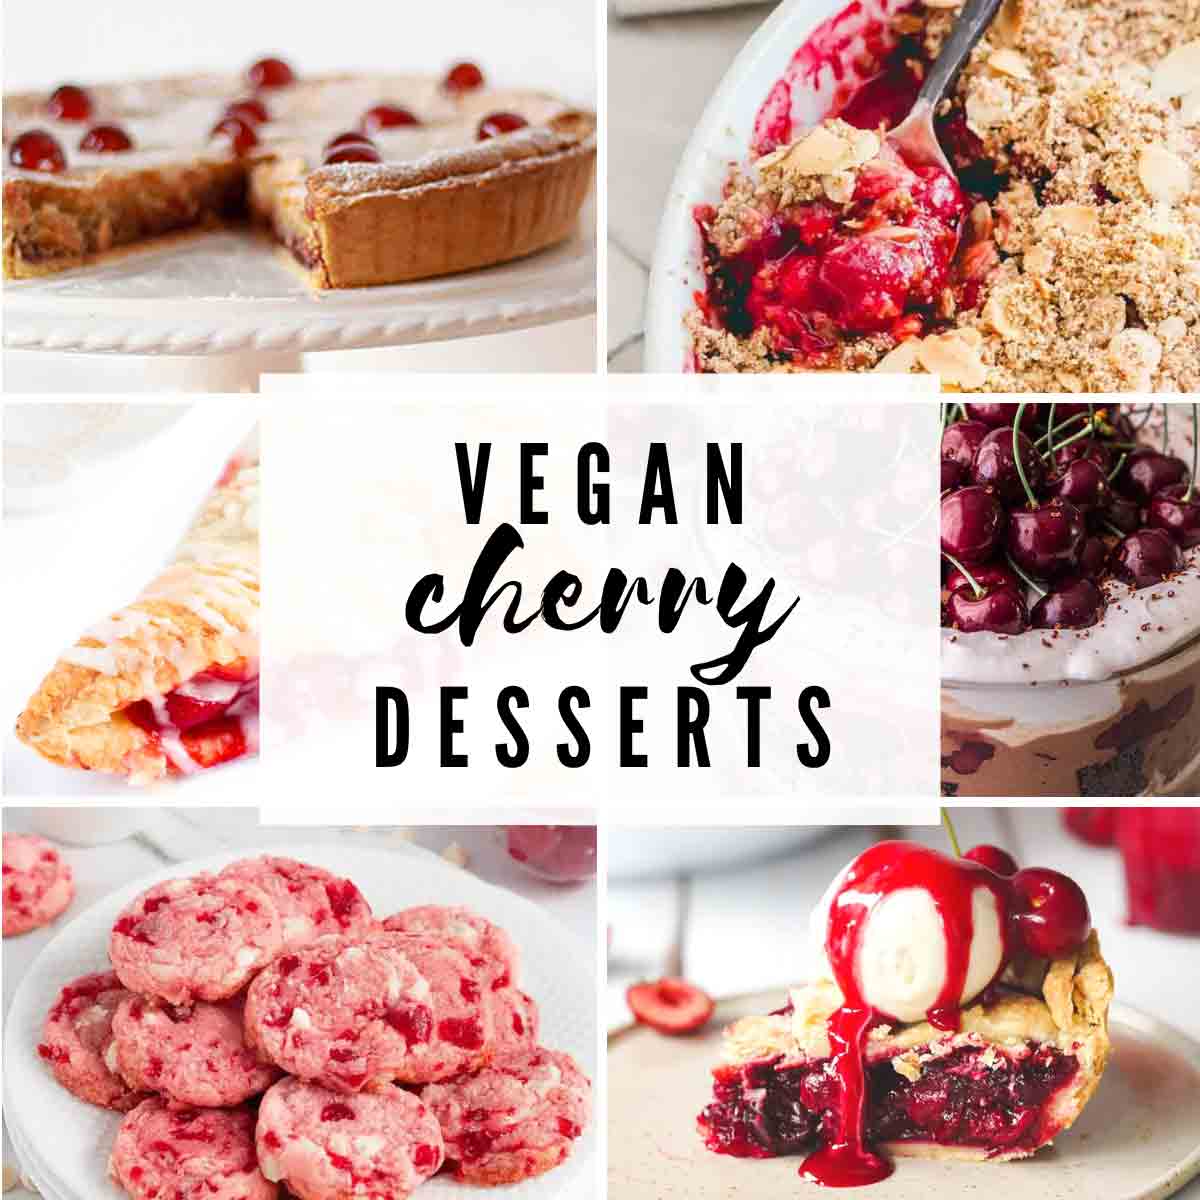 Vegan Cherry Desserts Image Collage With Text Overlay